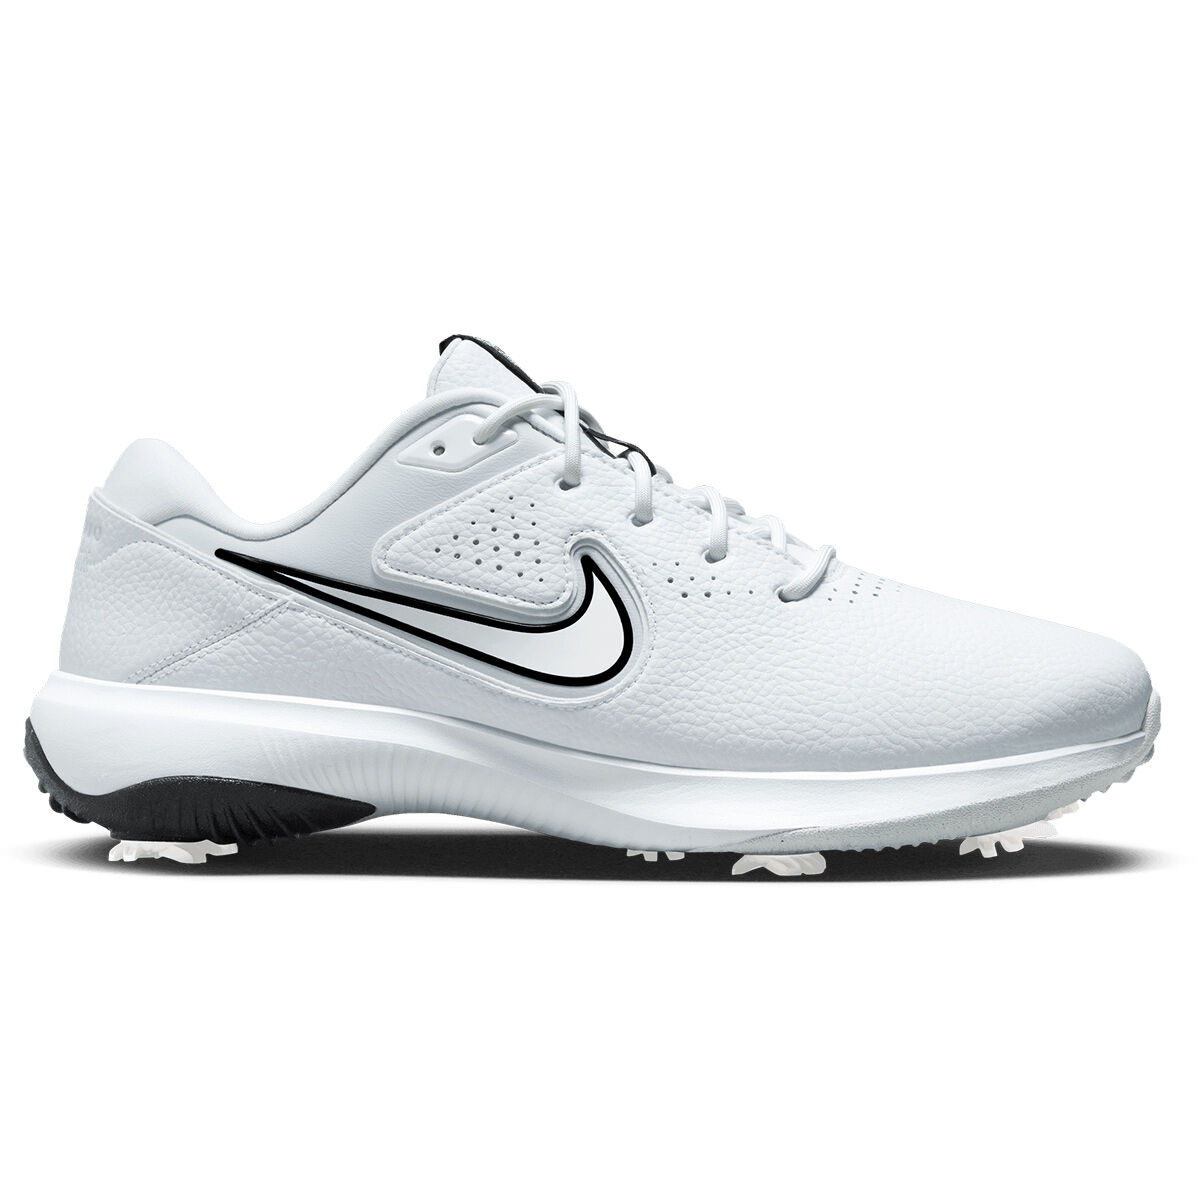 Nike Men’s Victory Pro 3 Waterproof Spiked Golf Shoes, Mens, White/black/pure platinum, 12 | American Golf